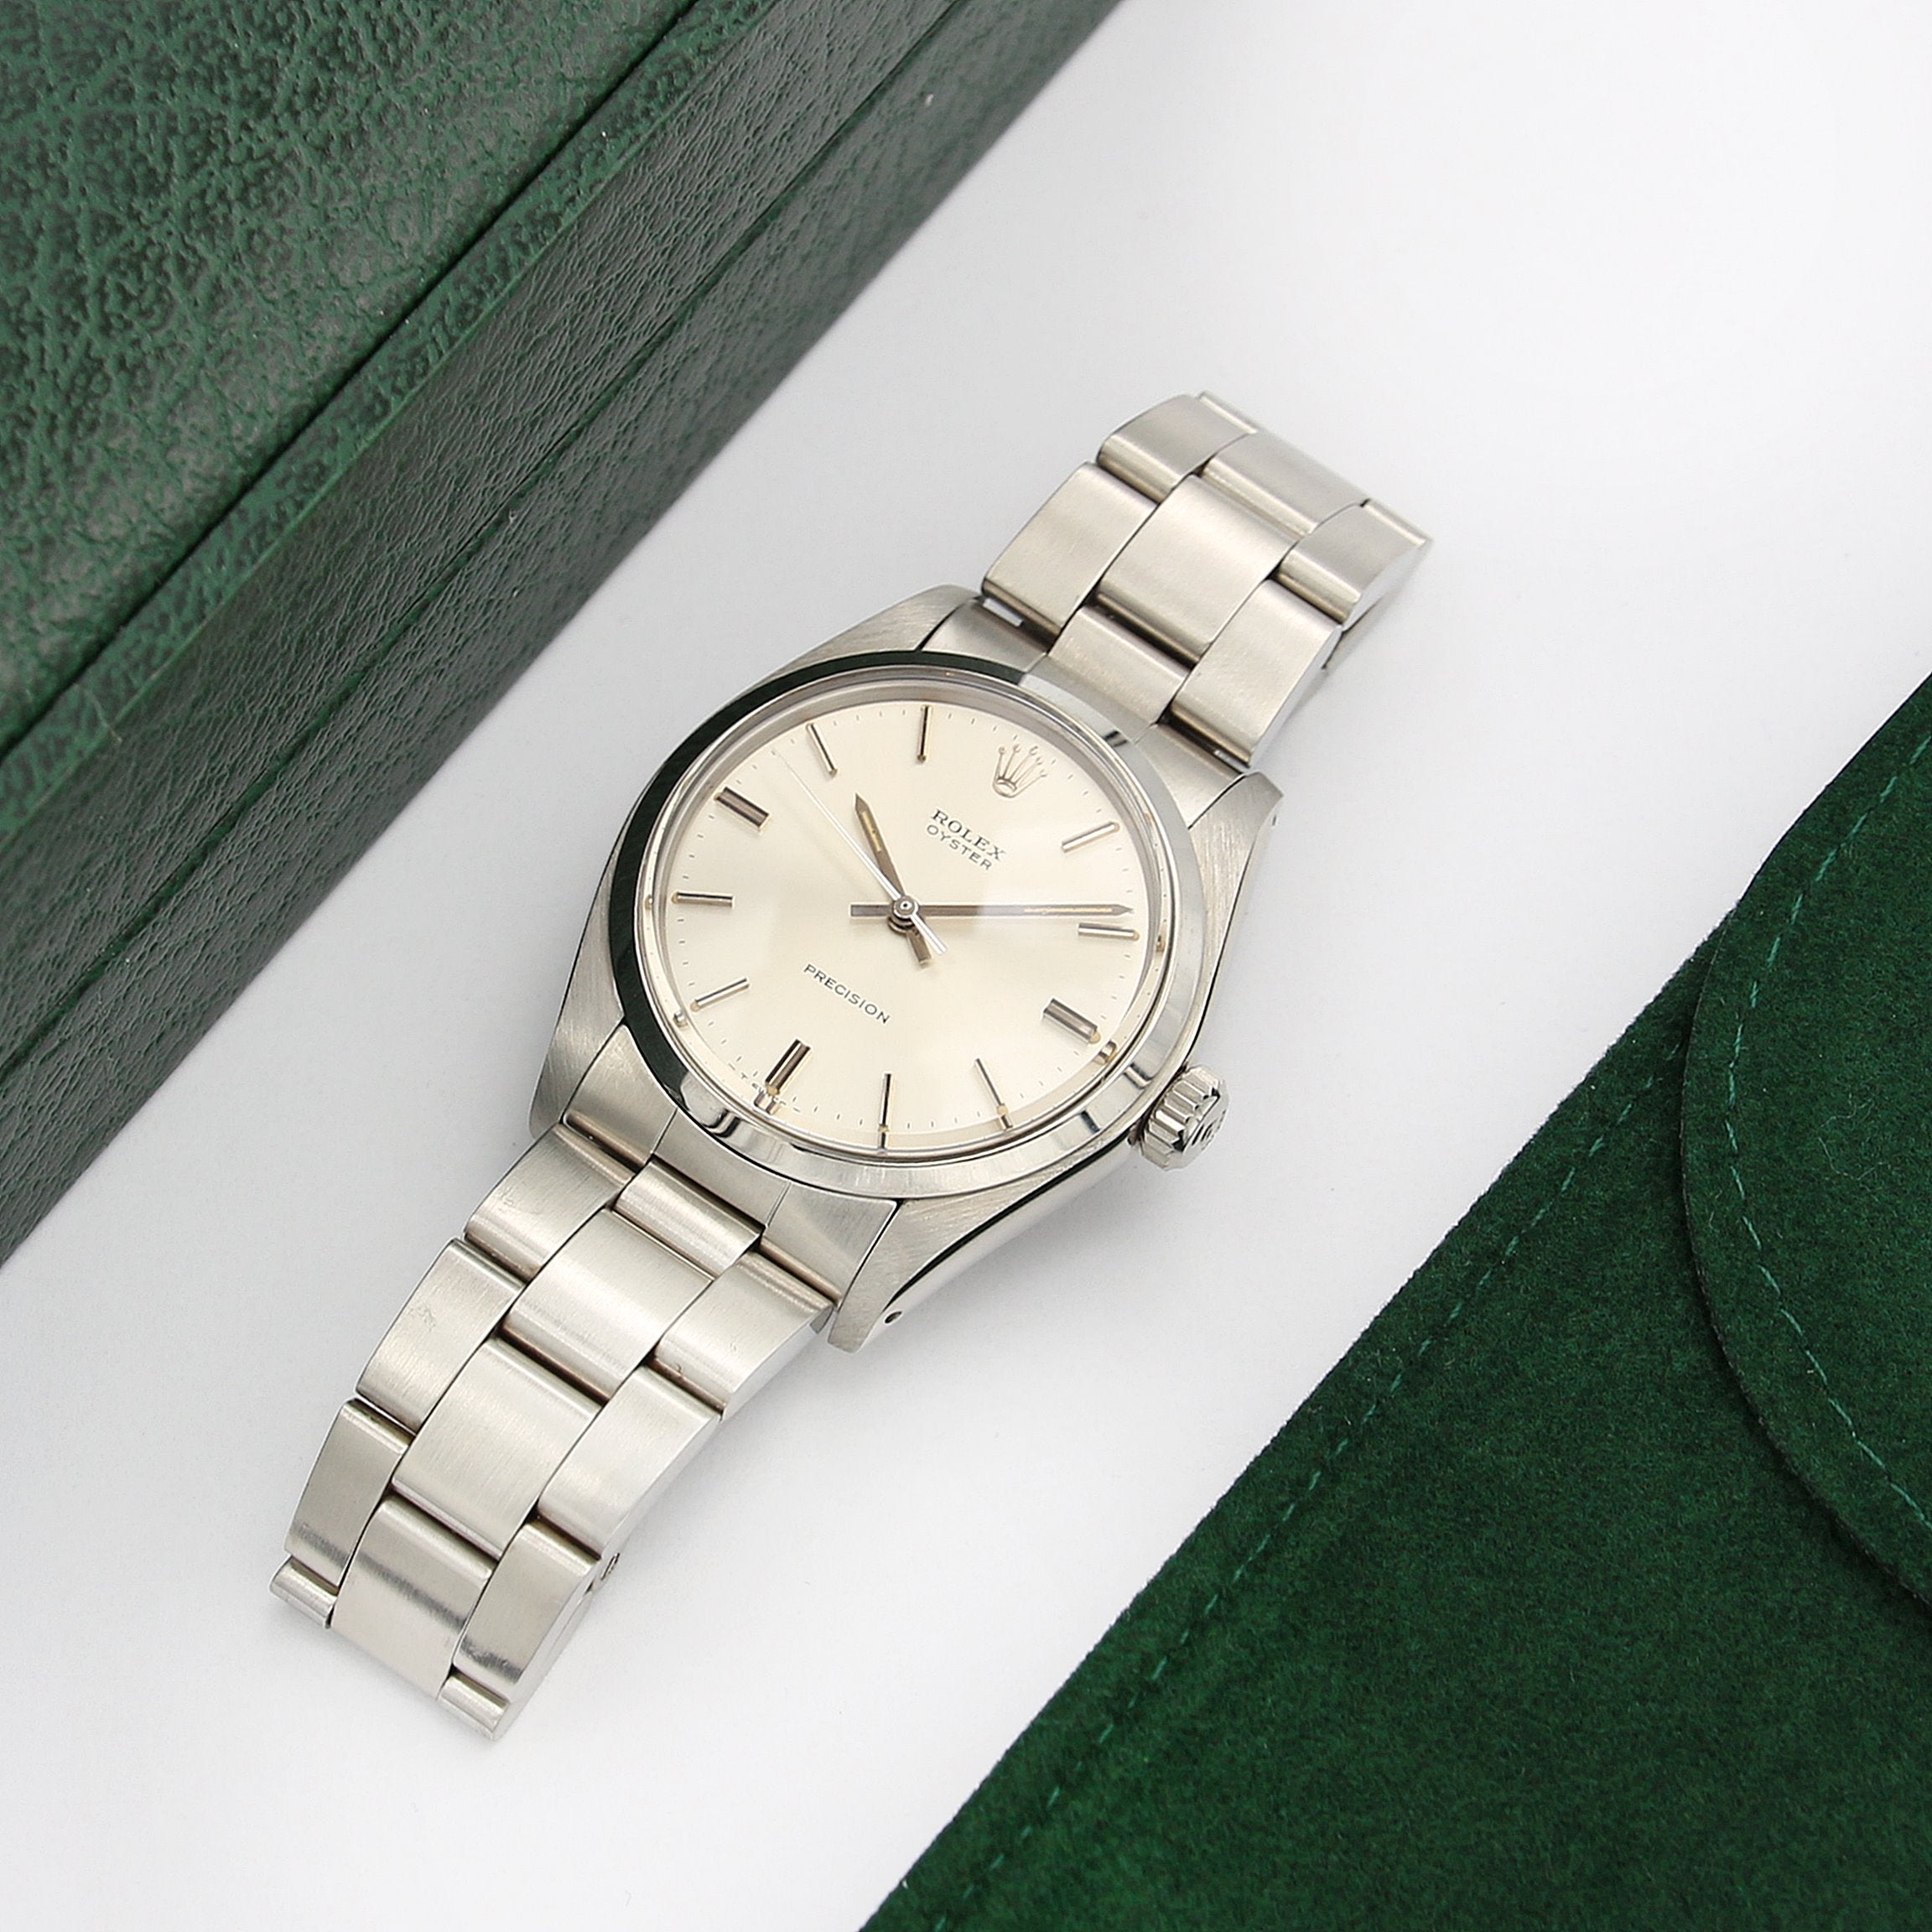 Rolex Oyster Precision ref. 6426 Silver Dial Oyster bracelet